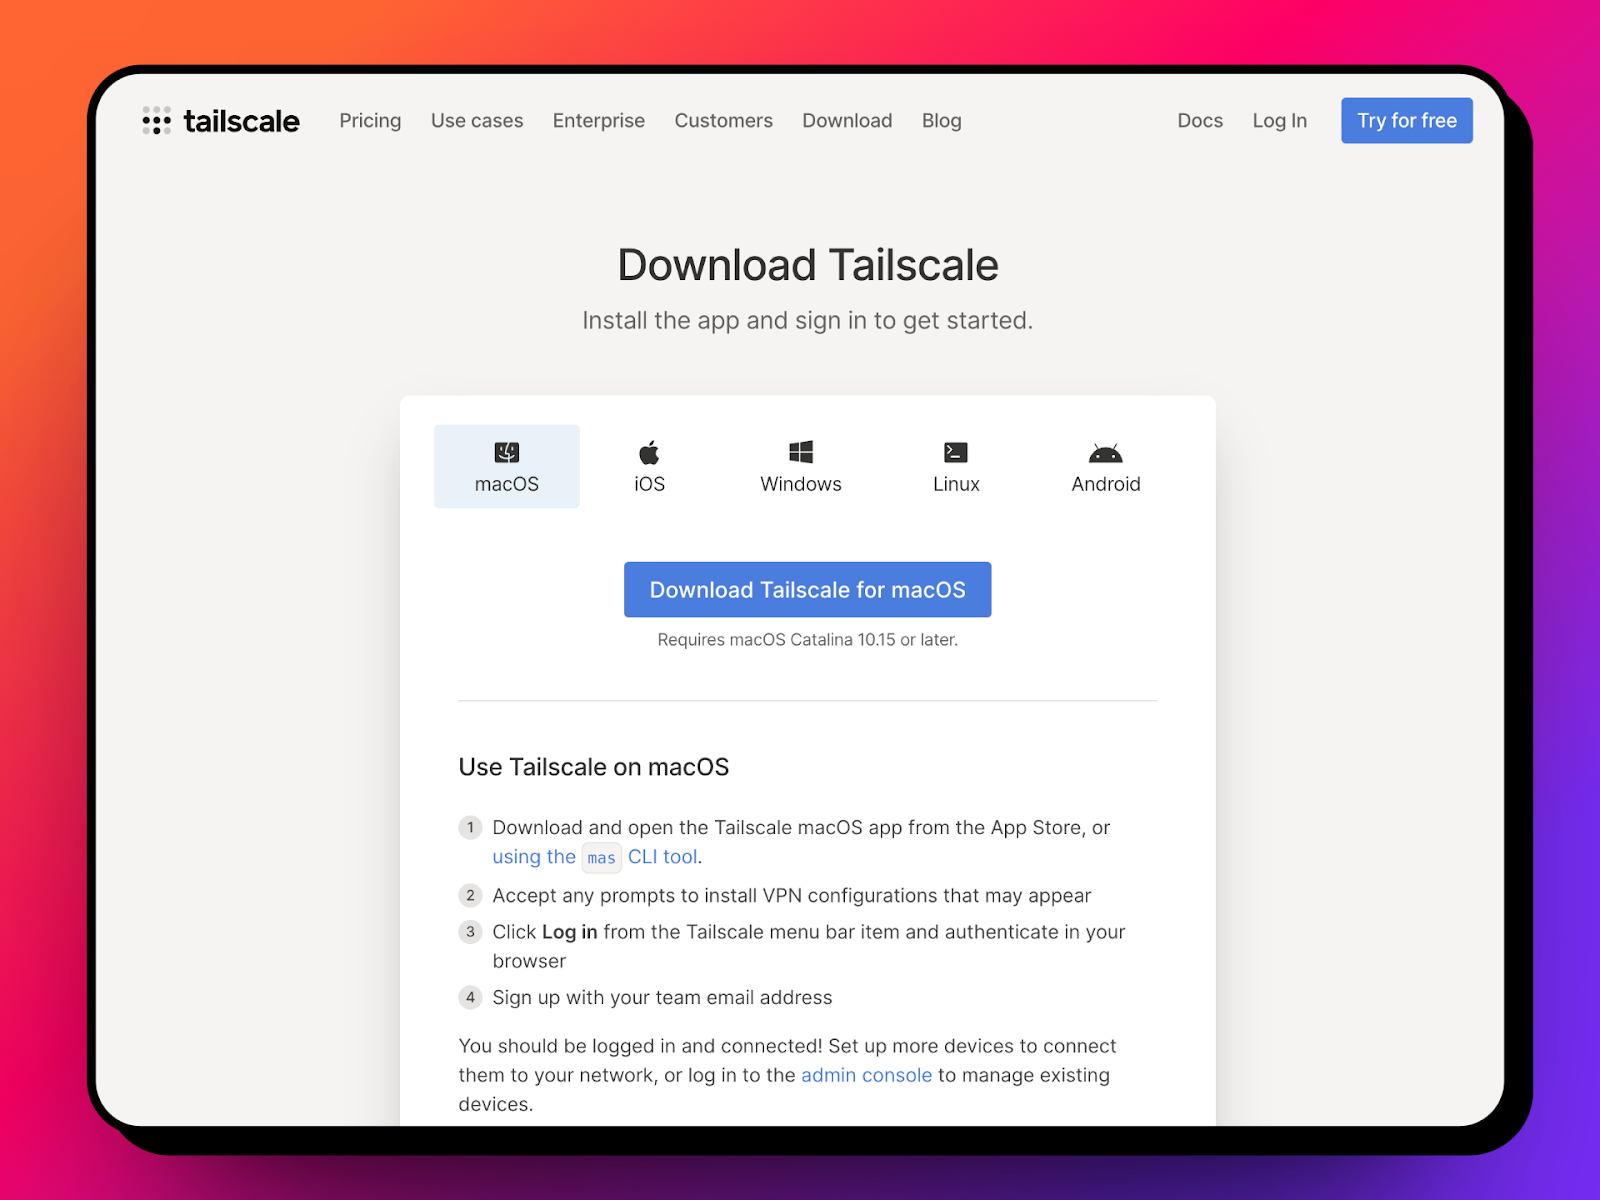 Tailscale Webpage: Download Tailscale on different Operating Systems